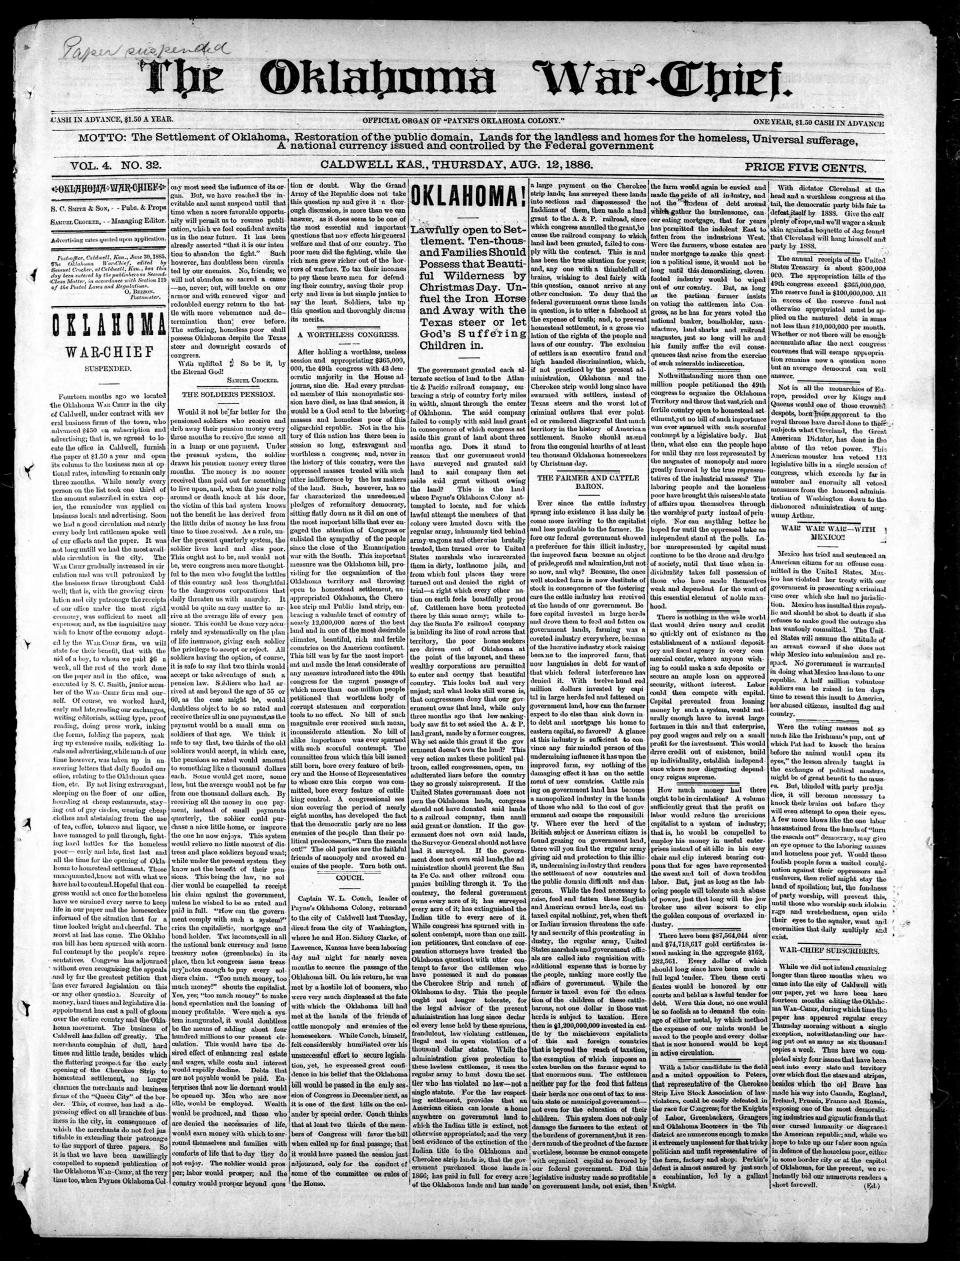 The Oklahoma War-Chief Newspaper from Aug. 12, 1886.